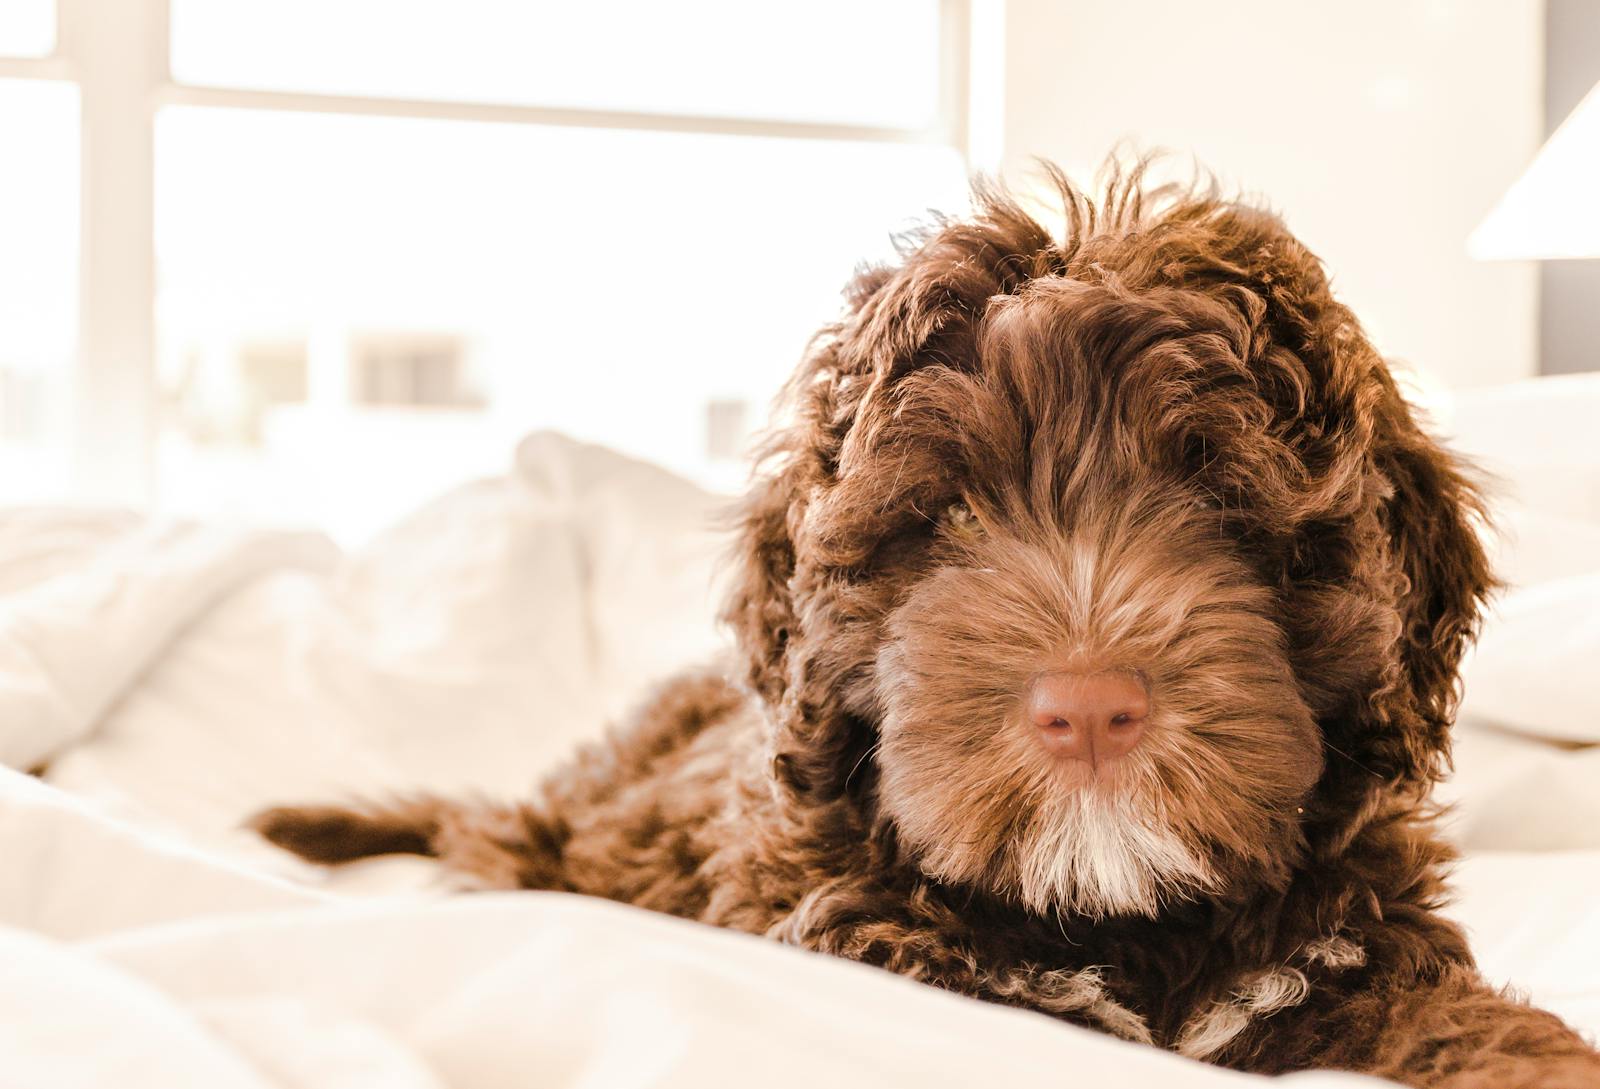 Tips for potty training your puppy